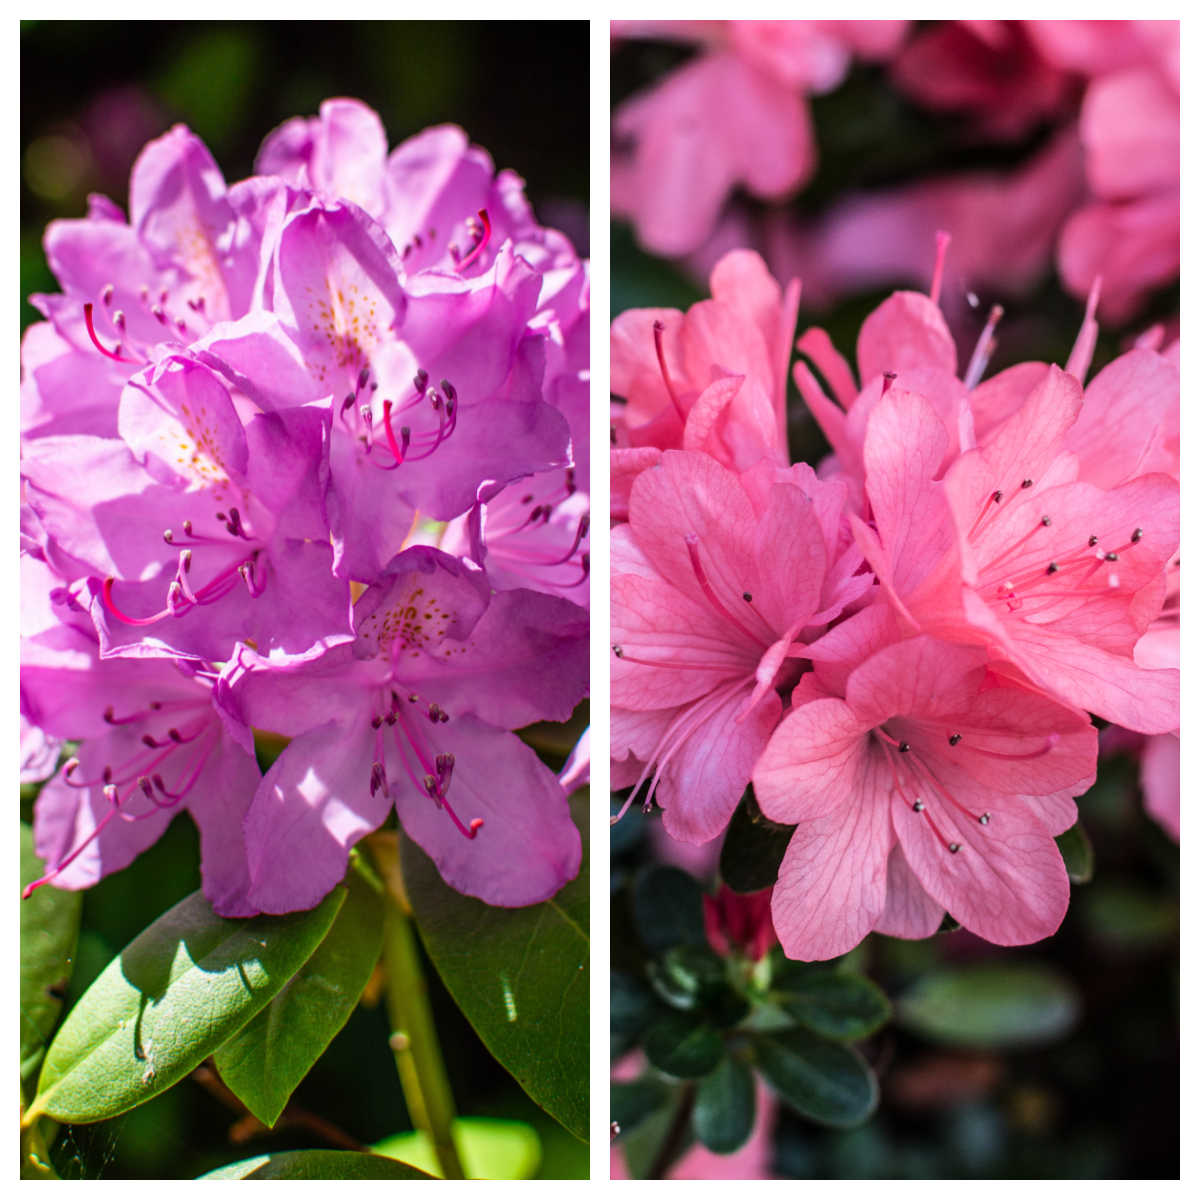 Collage: Left rhododendron flowers in pinkish purple.  Right azalea flowers in pink.